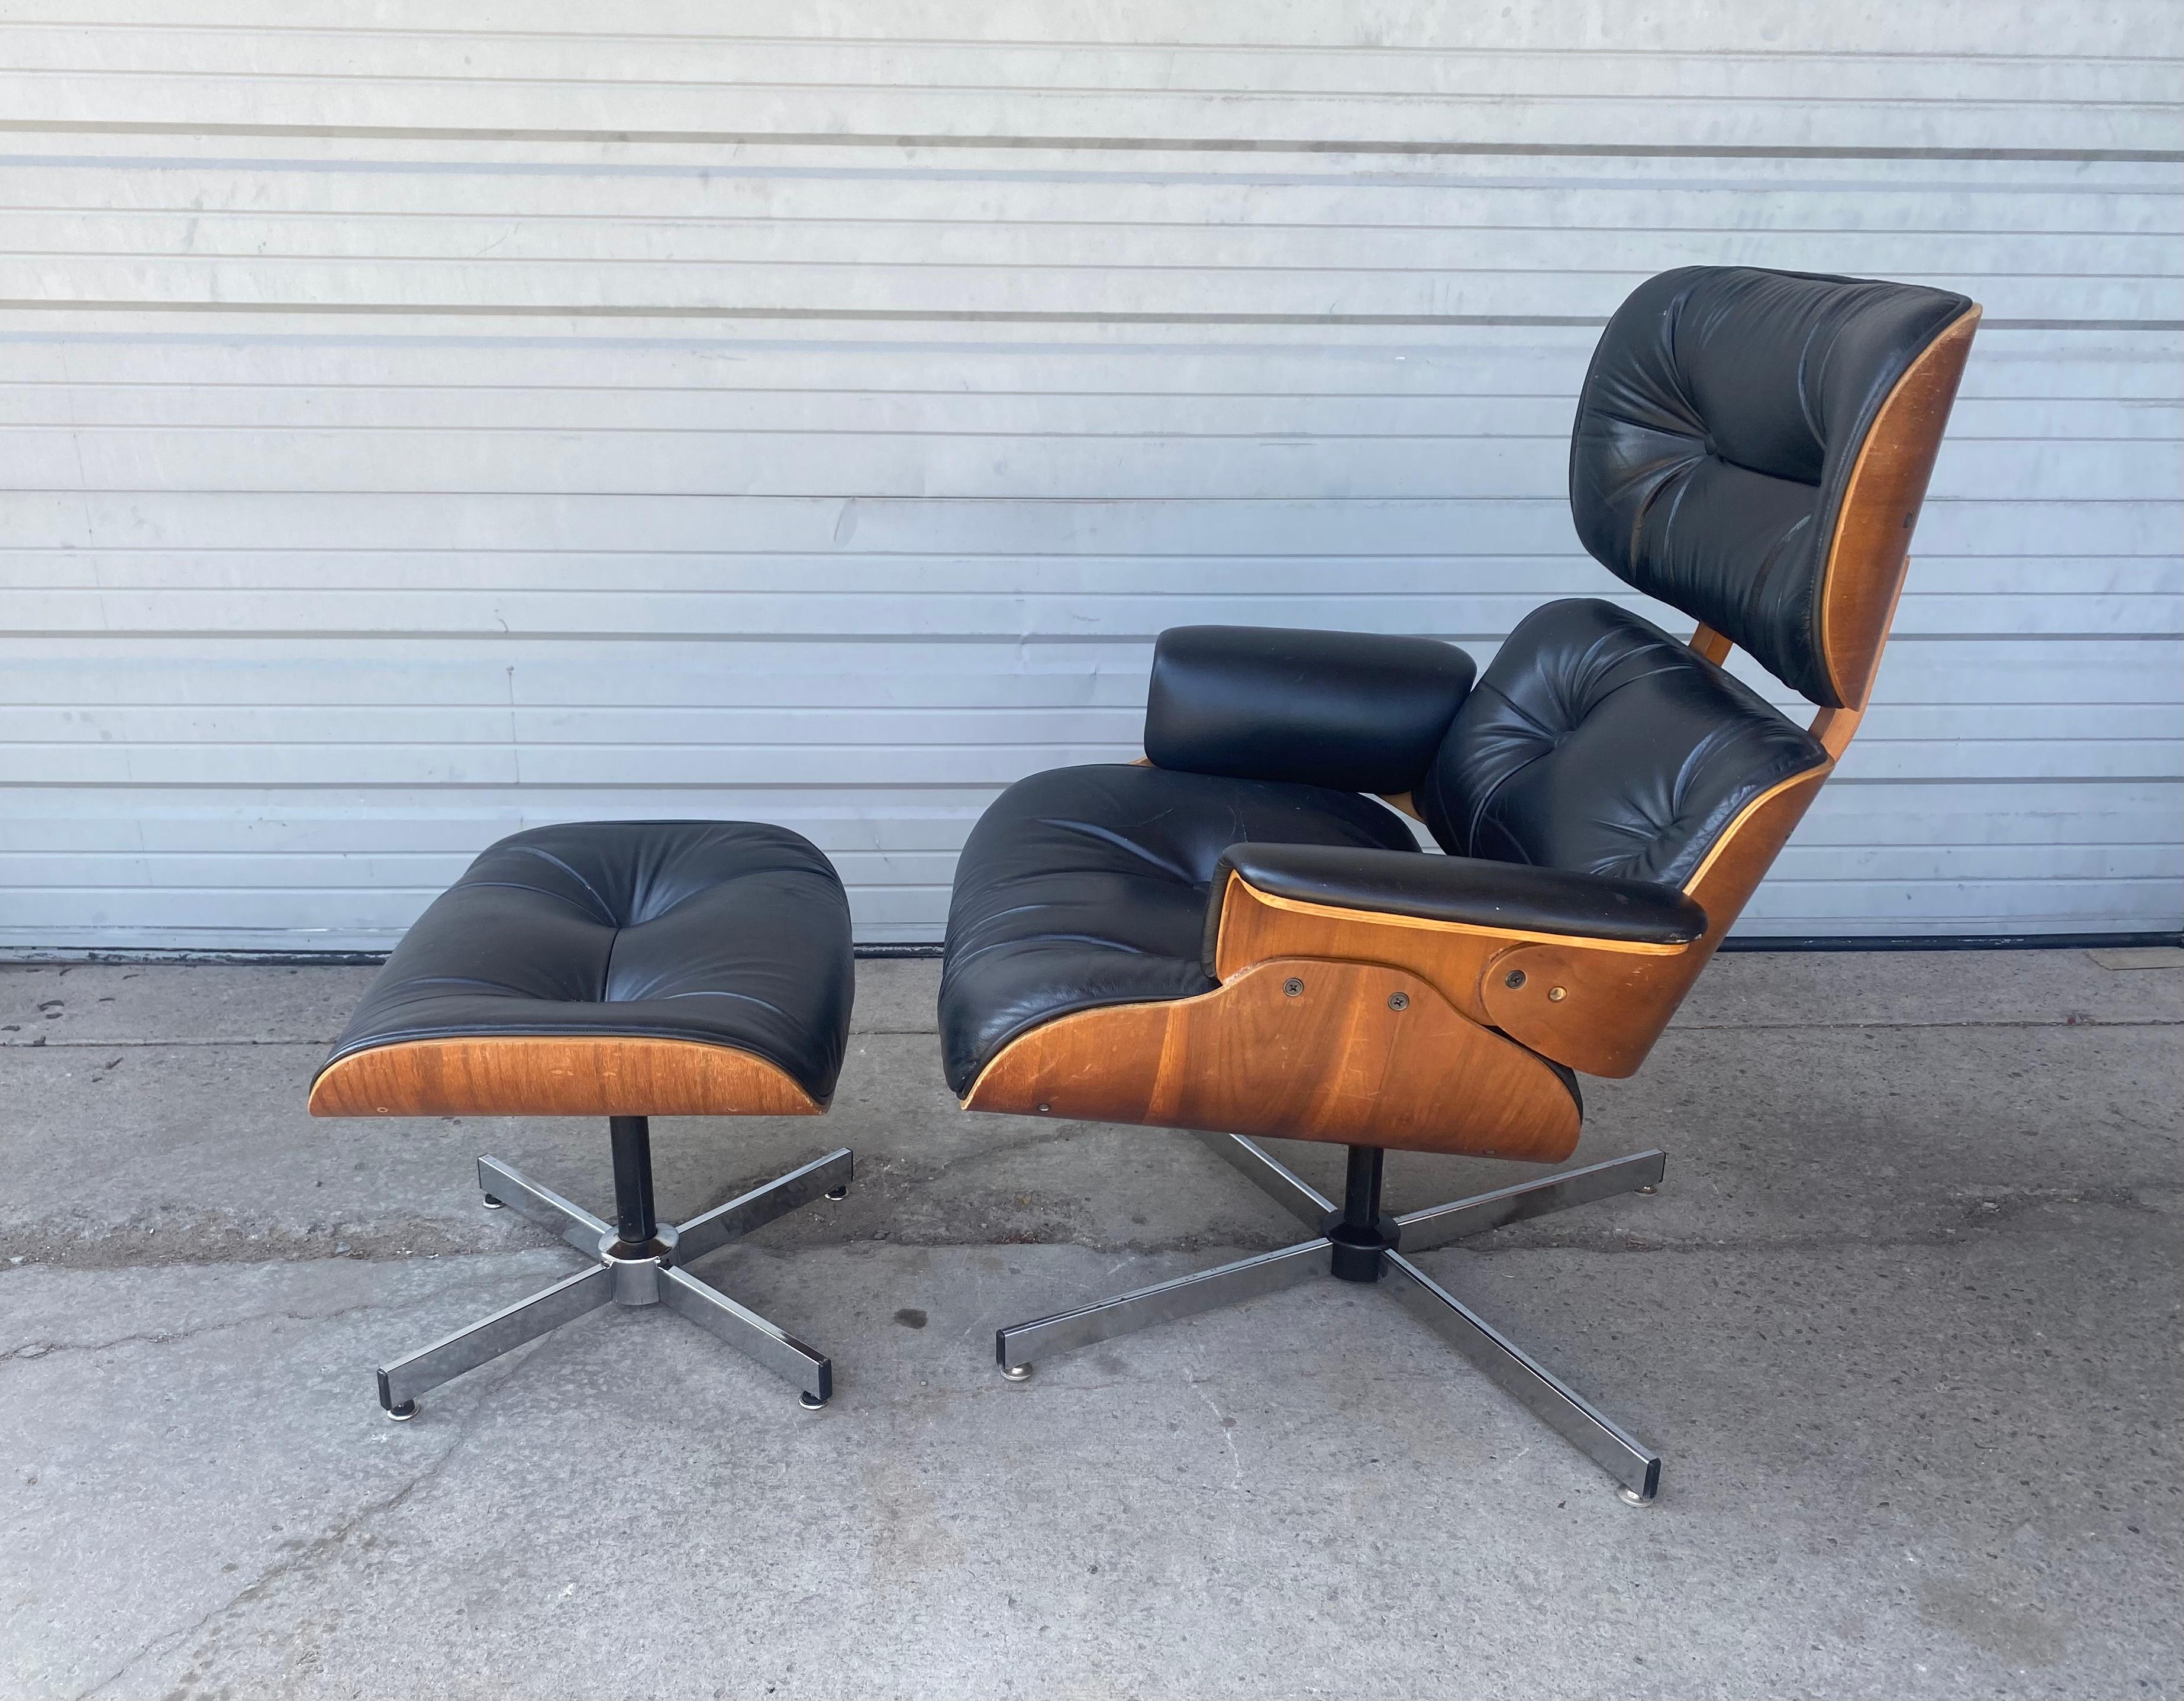 Vintage Plycraft lounge chair and ottoman, Amazing original condition, Extremely comfortable, Seldom seen version with wood back connectors. Hand delivery avail to new York City or anywhere en route from Buffalo NY

Mid-Century Modern swivel